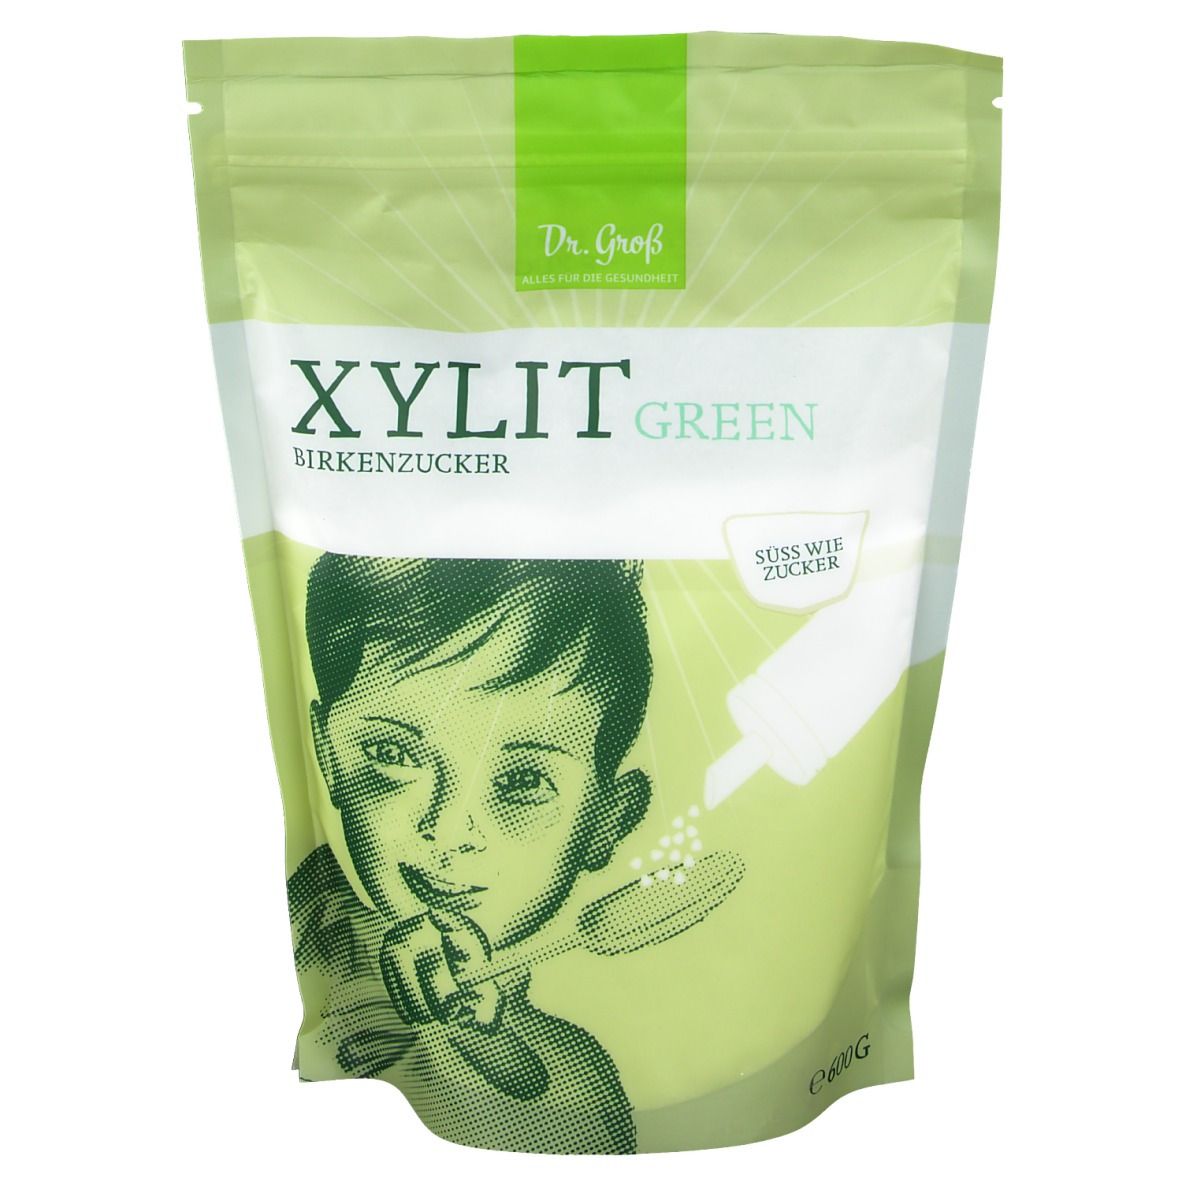 Dr. Groß Xylit green